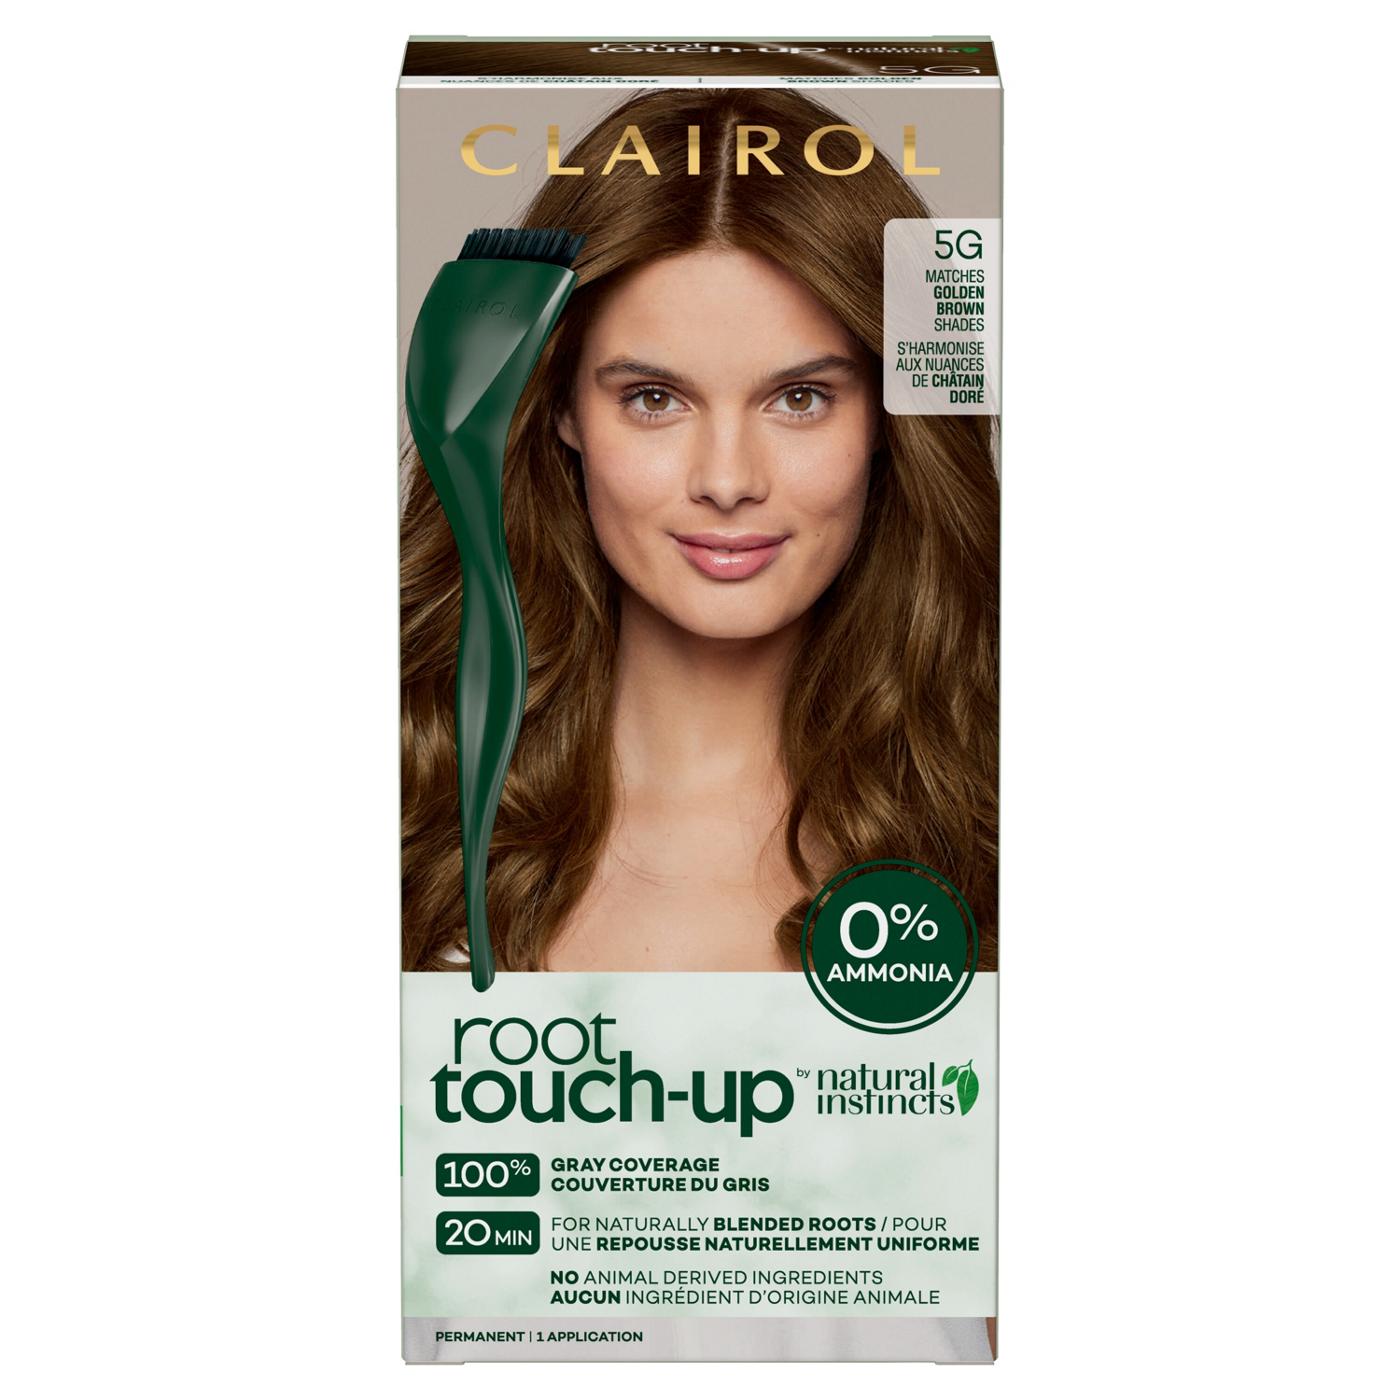 Clairol Root Touch-Up by Natural Instincts Ammonia-Free Permanent Hair Color 5G Matches Golden Brown Shades; image 1 of 3